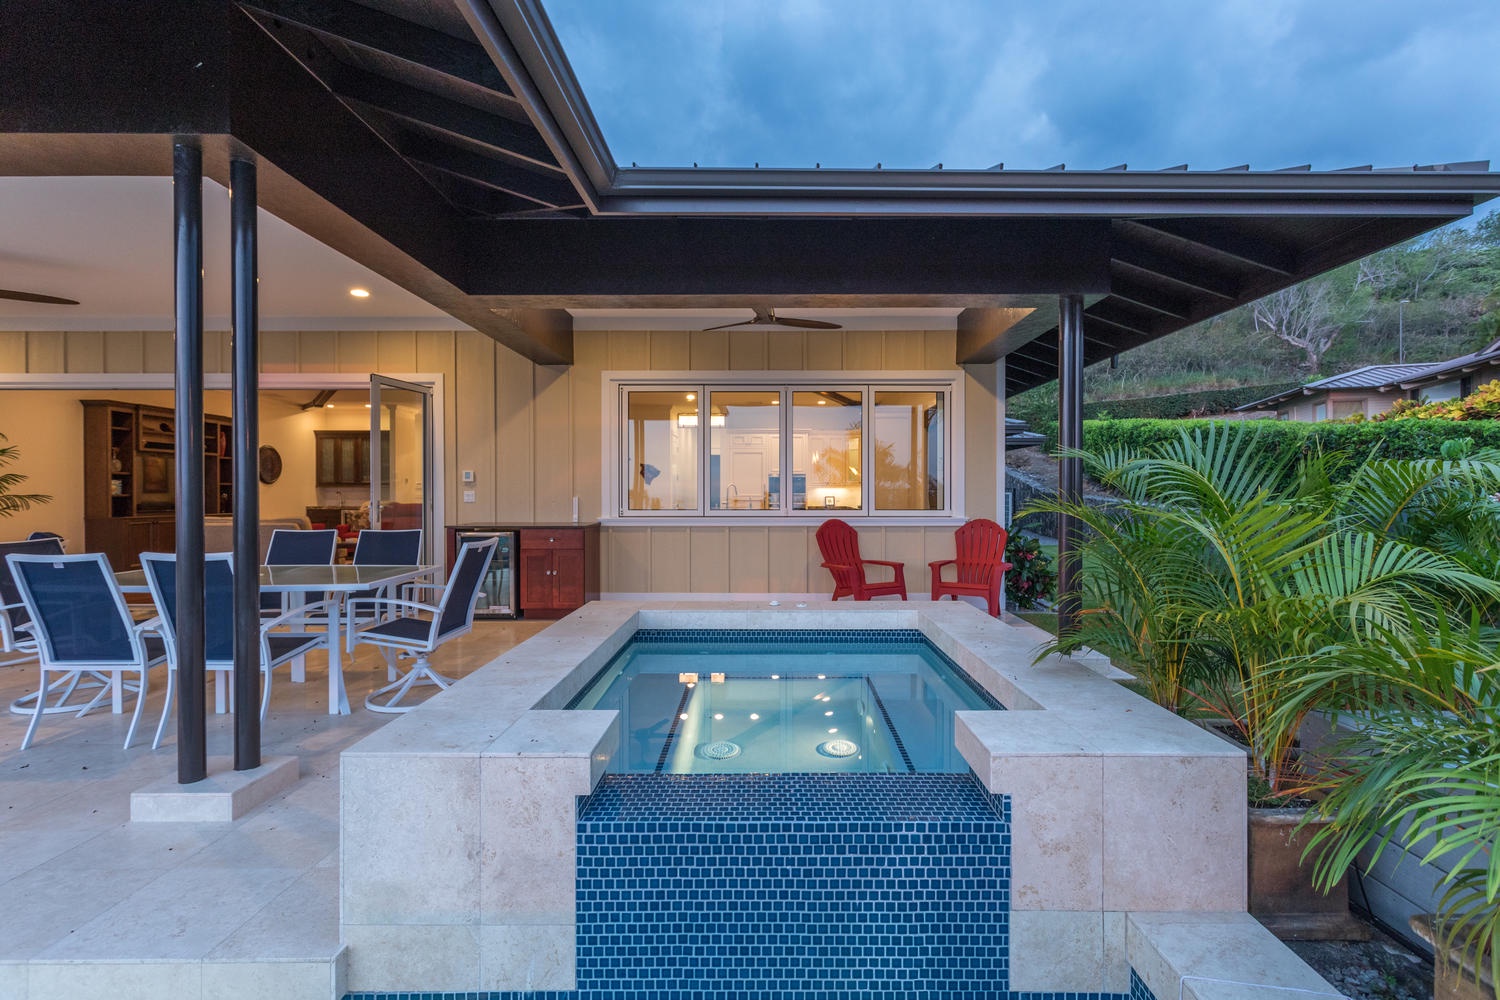 Kailua Kona Vacation Rentals, Ohana le'ale'a - Ohana Le'ale'a is conveniently located by the Keauhou Shopping Plaza and is only 2 miles from the famous Ali'I Dr, offering unbeatable dining and shopping experiences